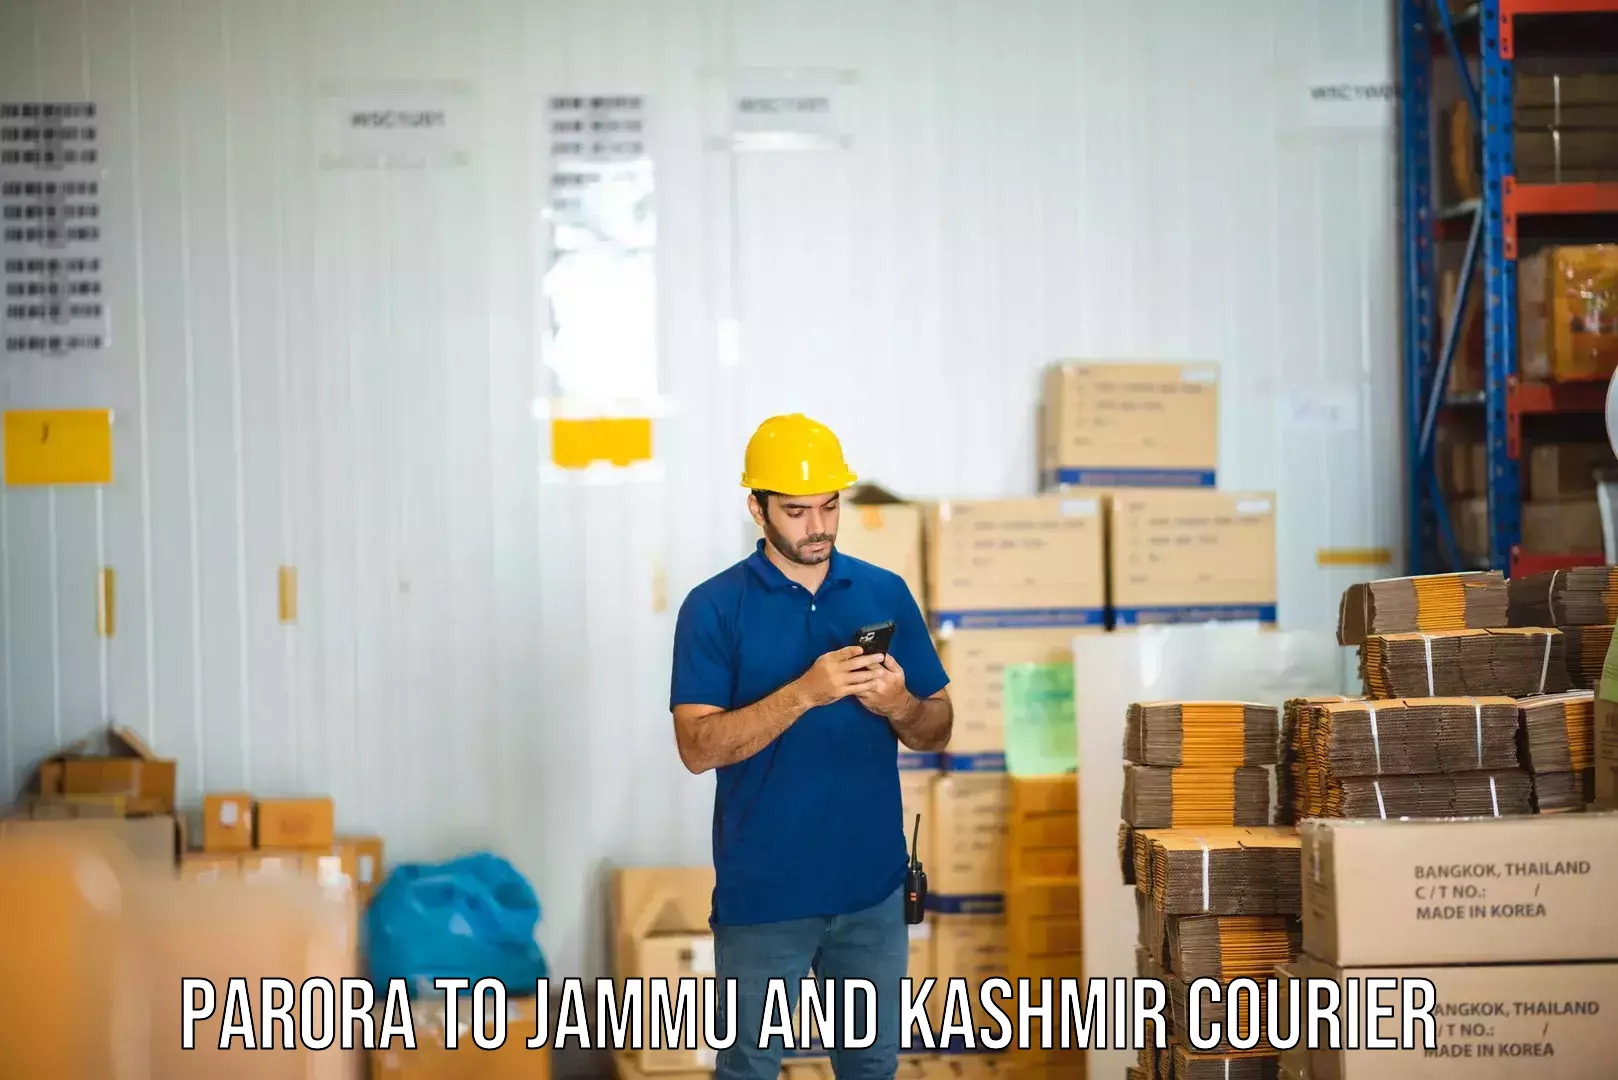 Rural area delivery Parora to Jammu and Kashmir